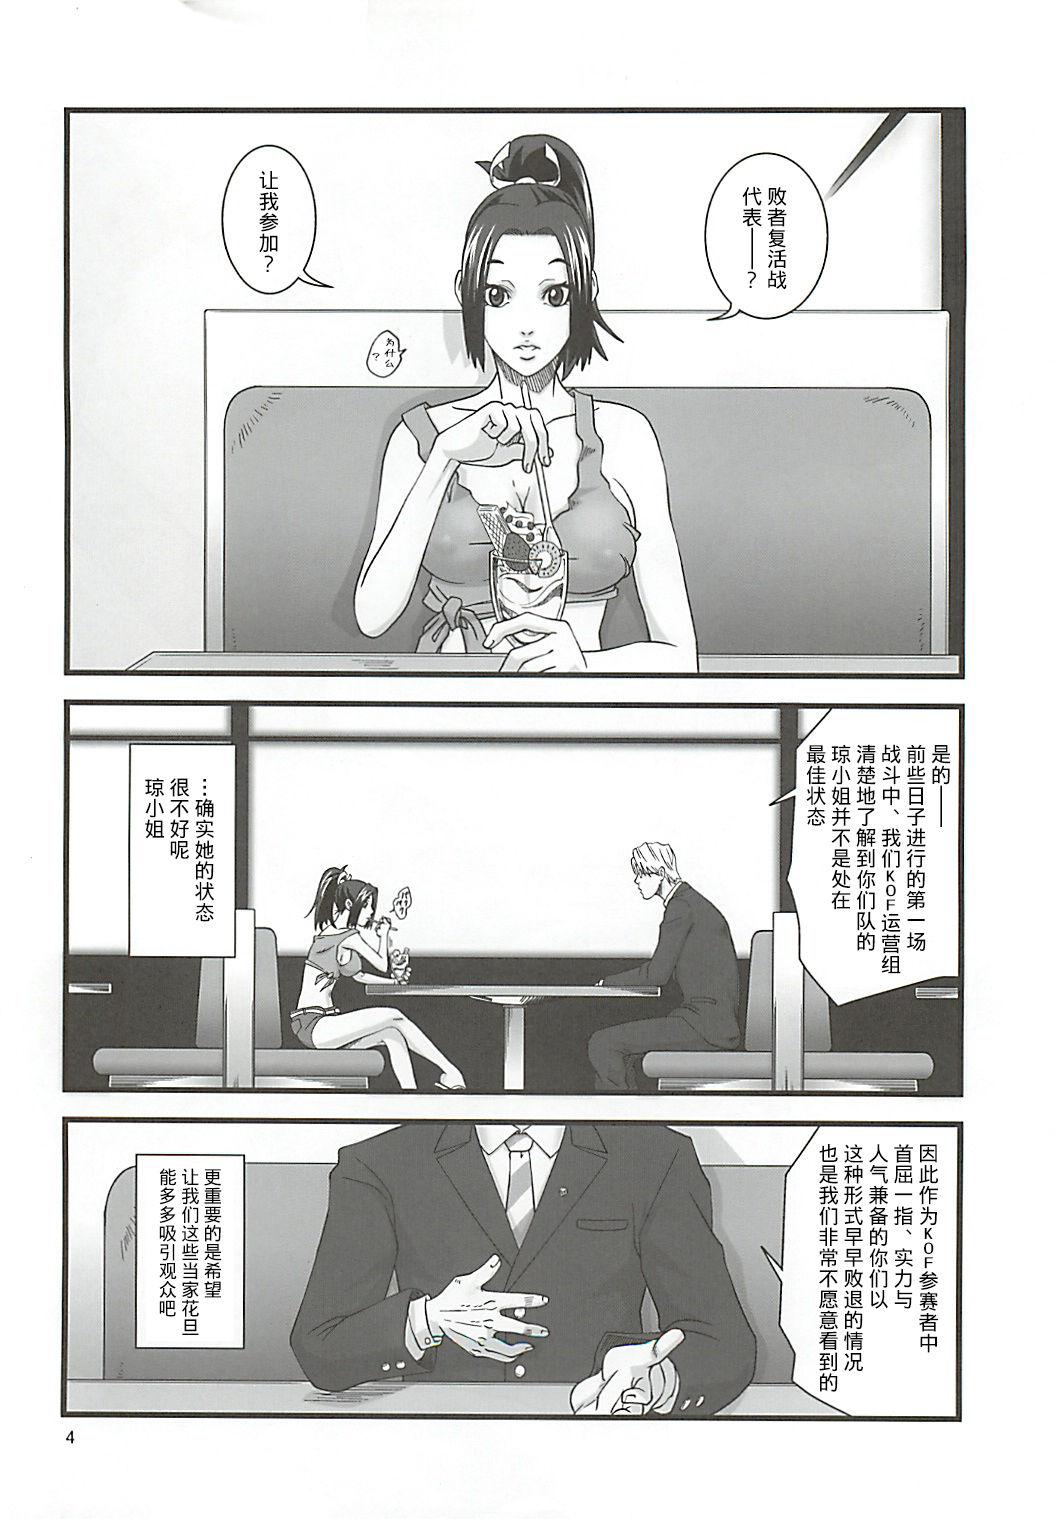 Egypt [Tokkuriya (Tonbo)] Shiranui Muzan 1 (King of Fighters) [Chinese]【不可视汉化】 - King of fighters Whores - Page 4